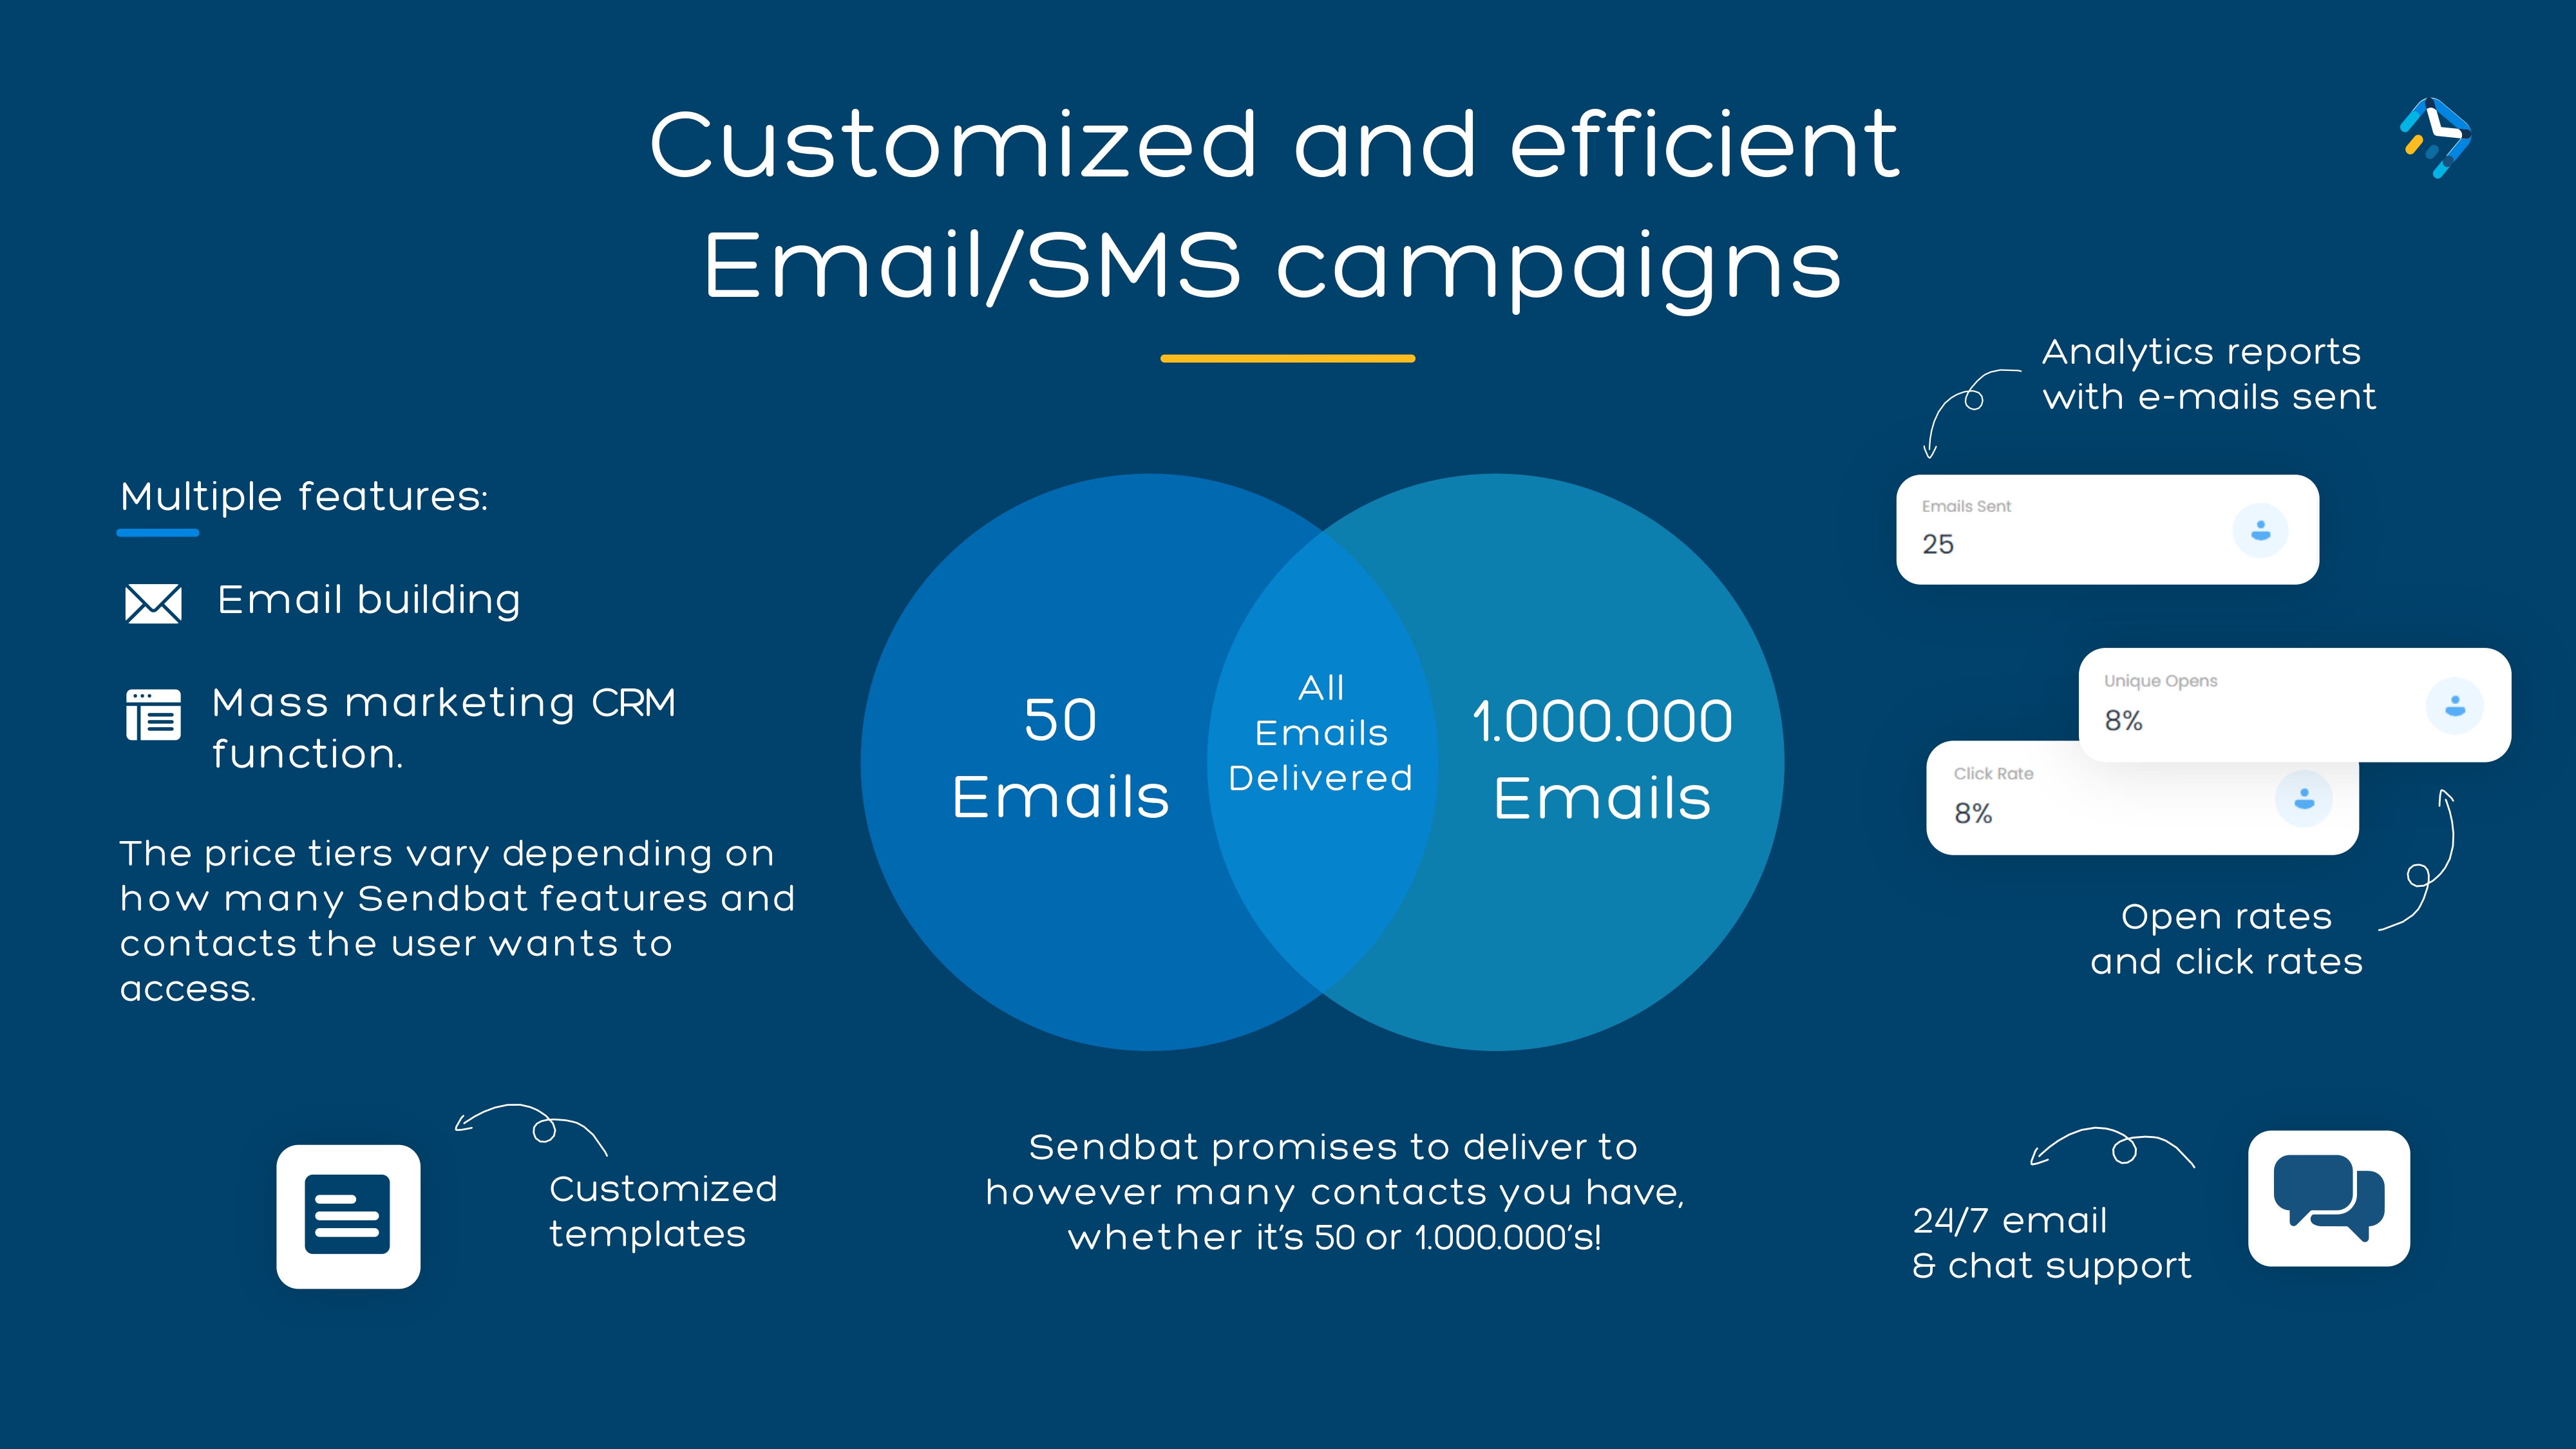 Customized and Efficient Email/SMS Campaigns